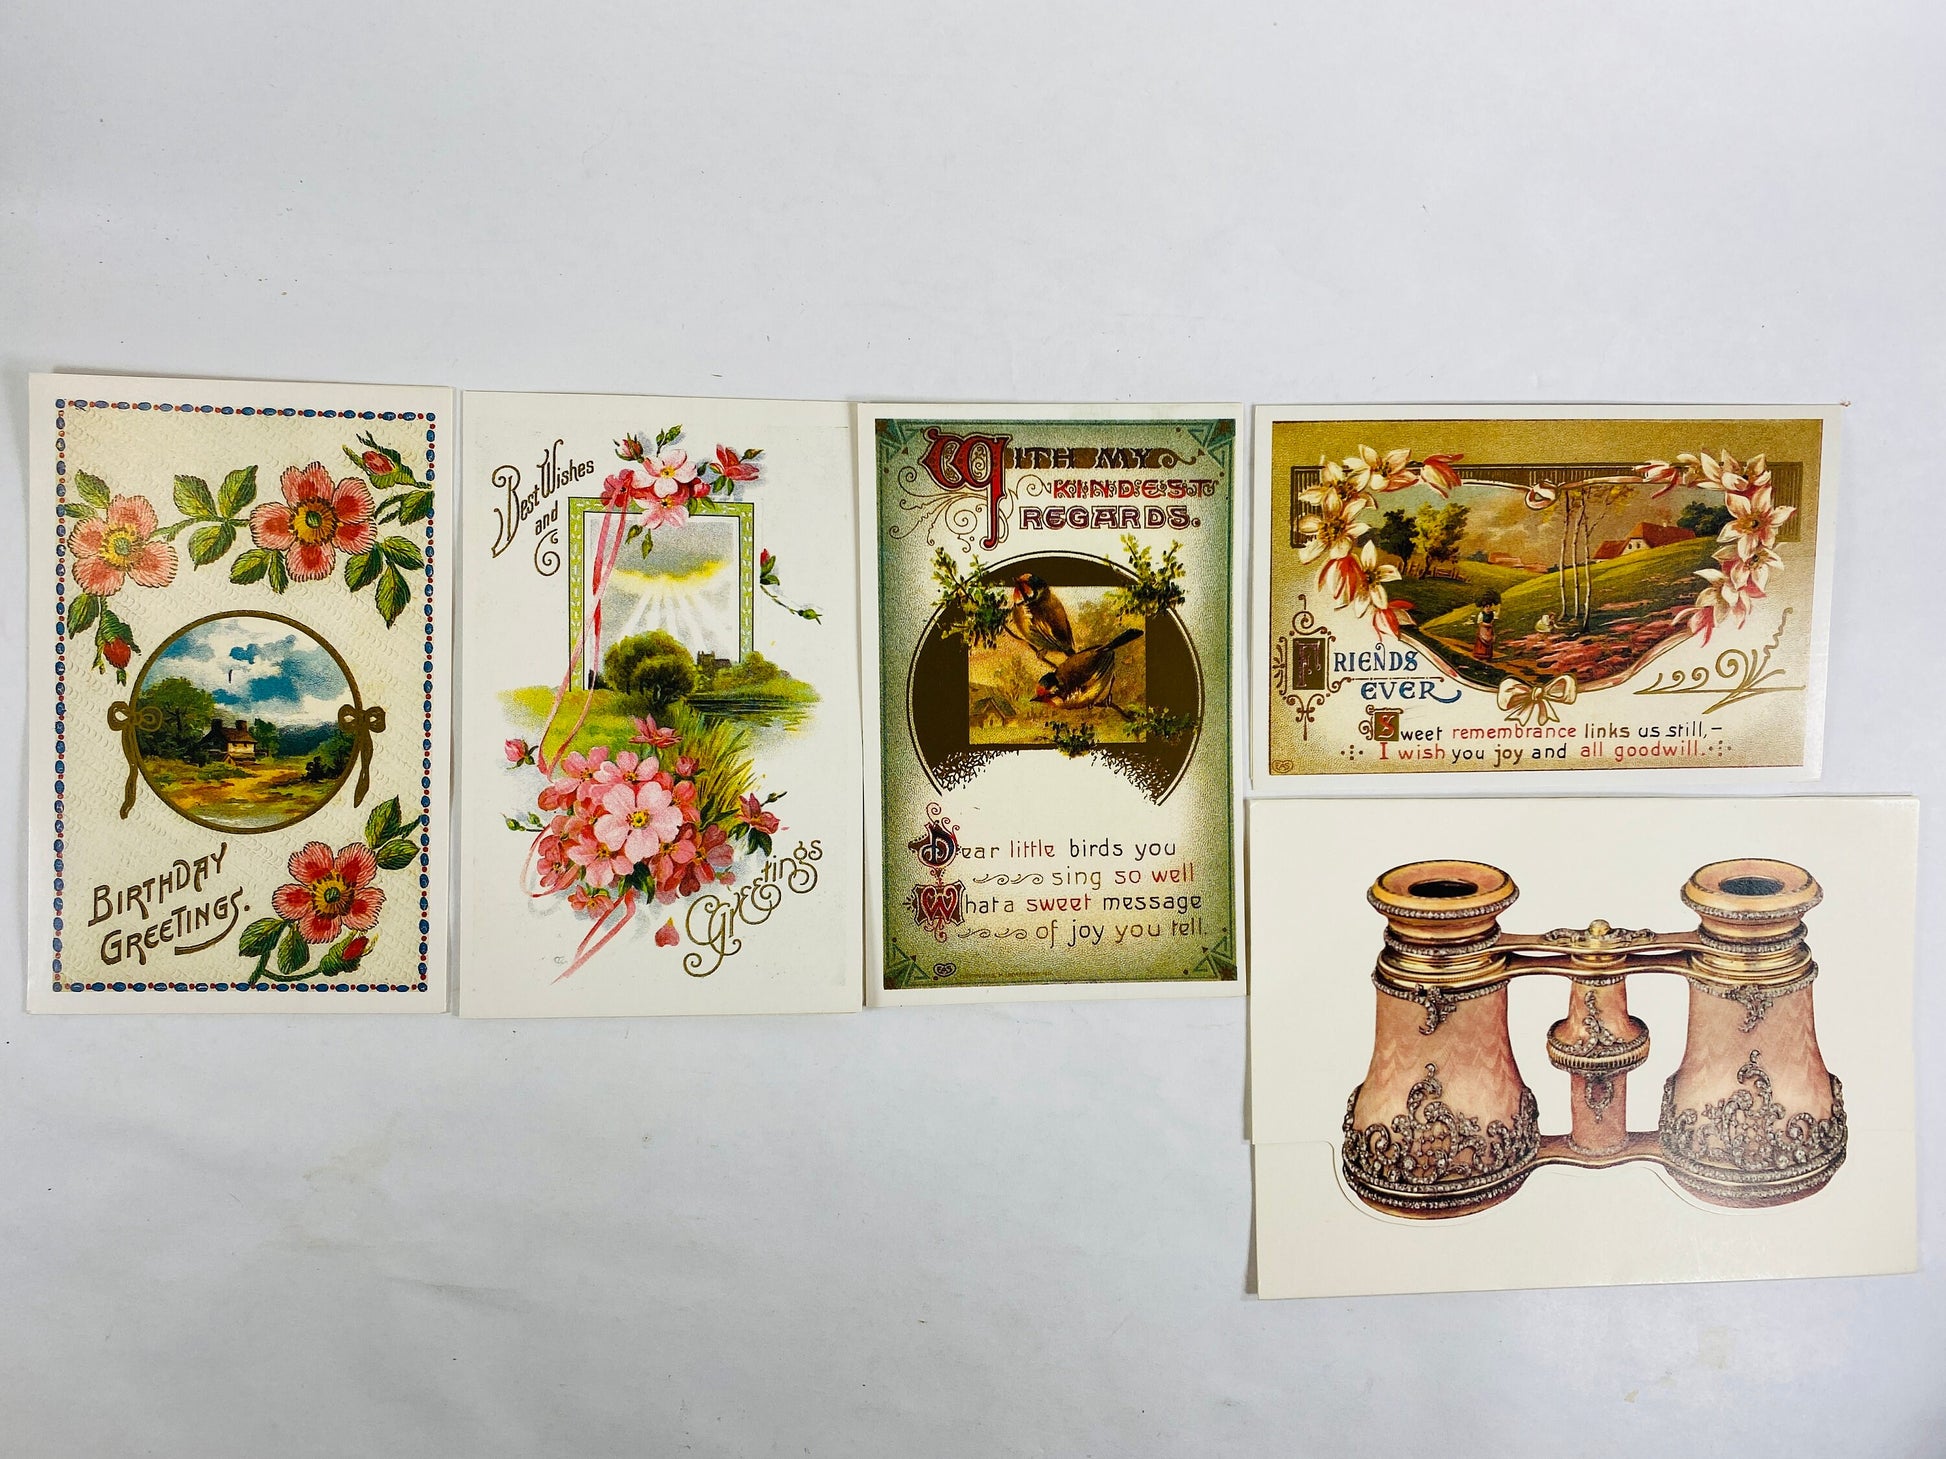 Vintage 1970s birthday and best wishes cards Lot of 5 greetings in VG condition! Reader's Digest, Opera and more!